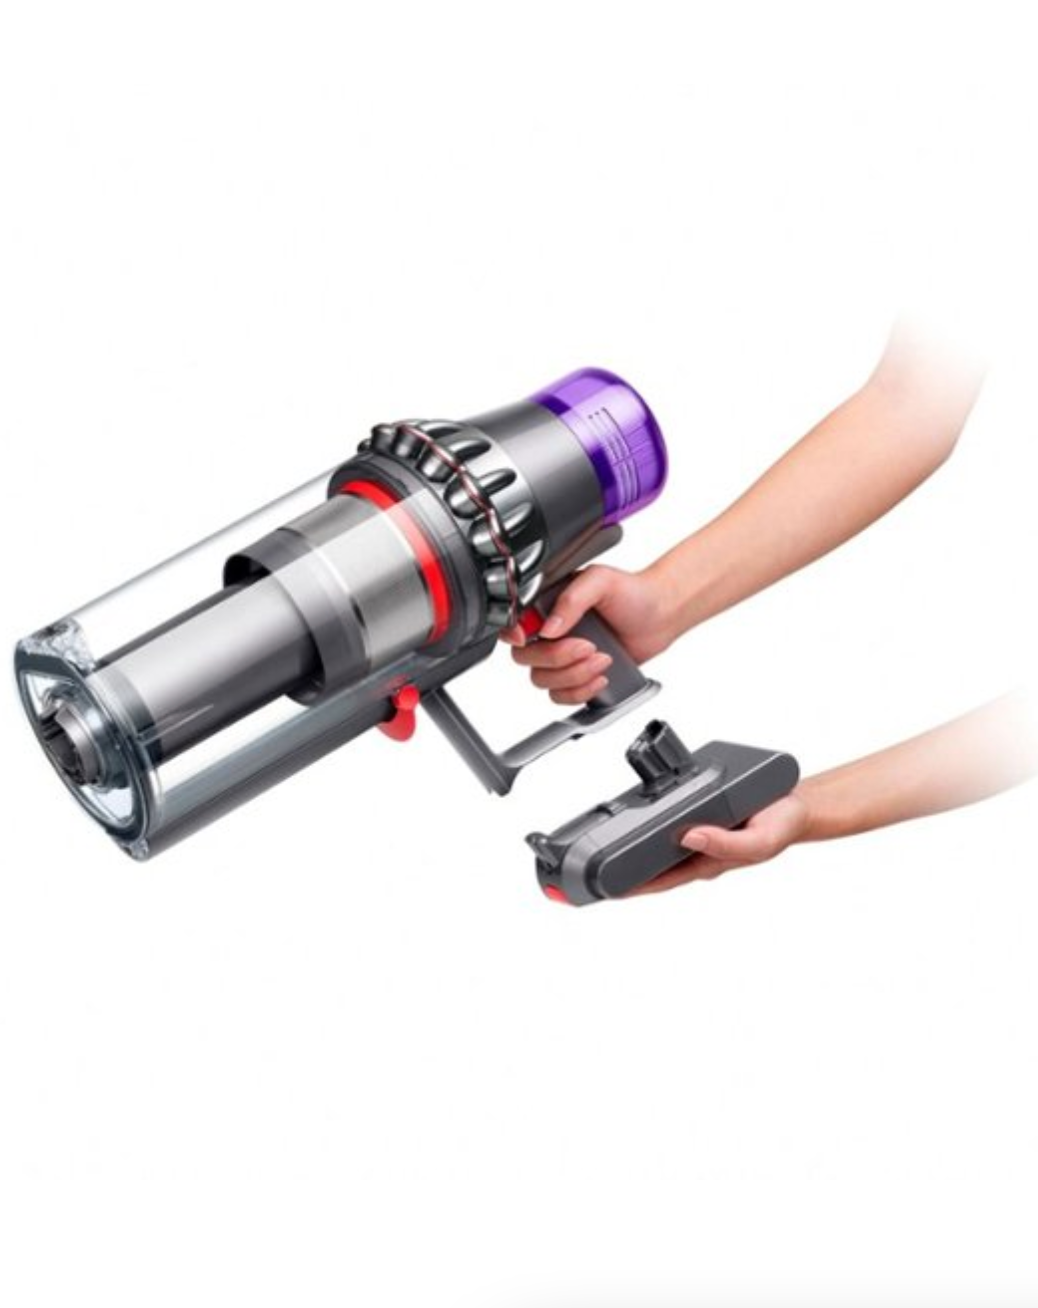 Dyson - Outsize Cordless Vacuum Cleaner - Nickel